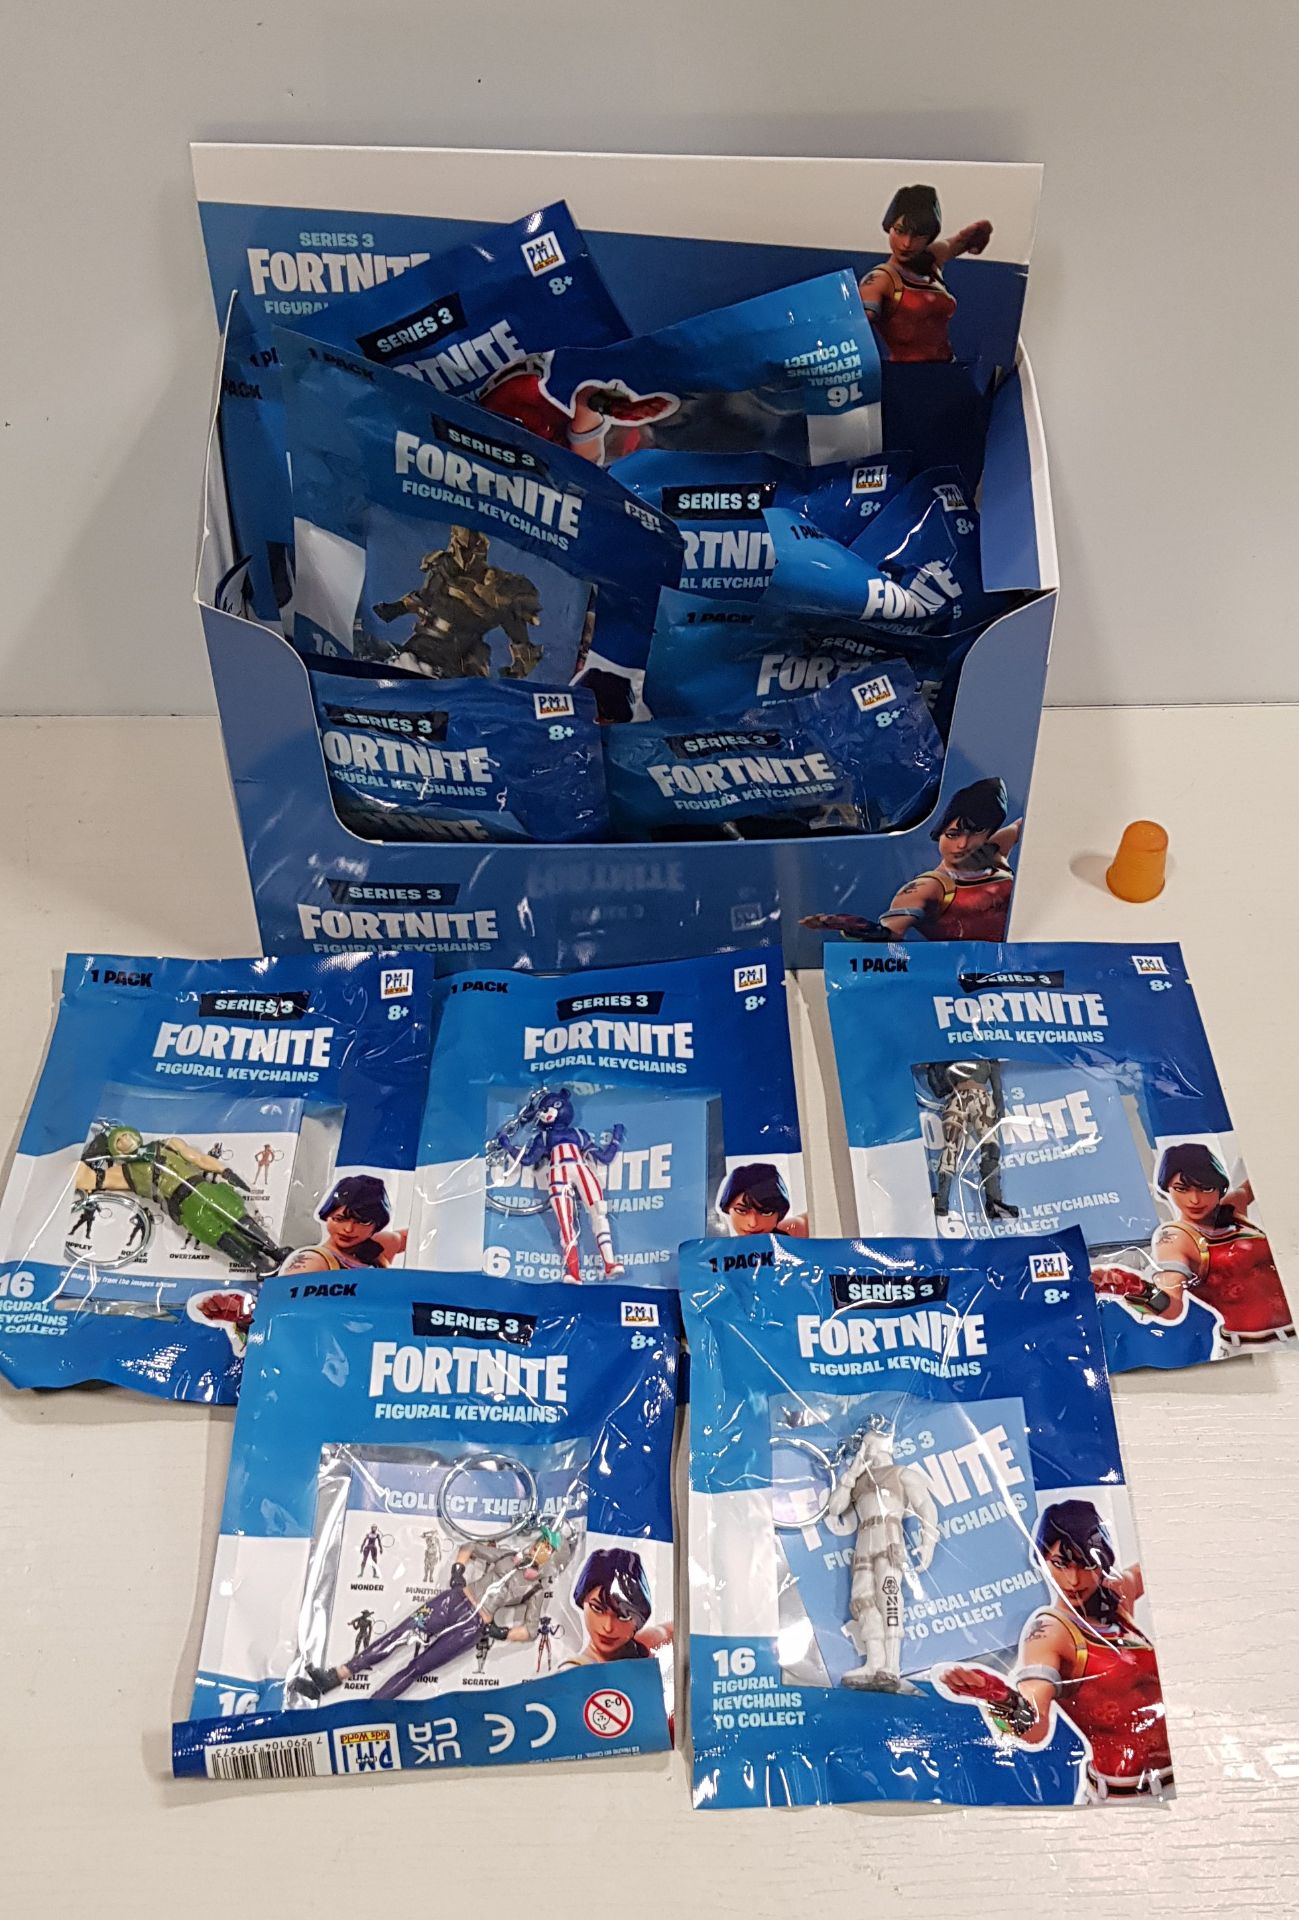 96 X BRAND NEW SERIES 3 FORTNITE 3D KEYCHAINS - CHARACTER FIGURES - IN DISPLAY BOX OF 24 PCS - IN